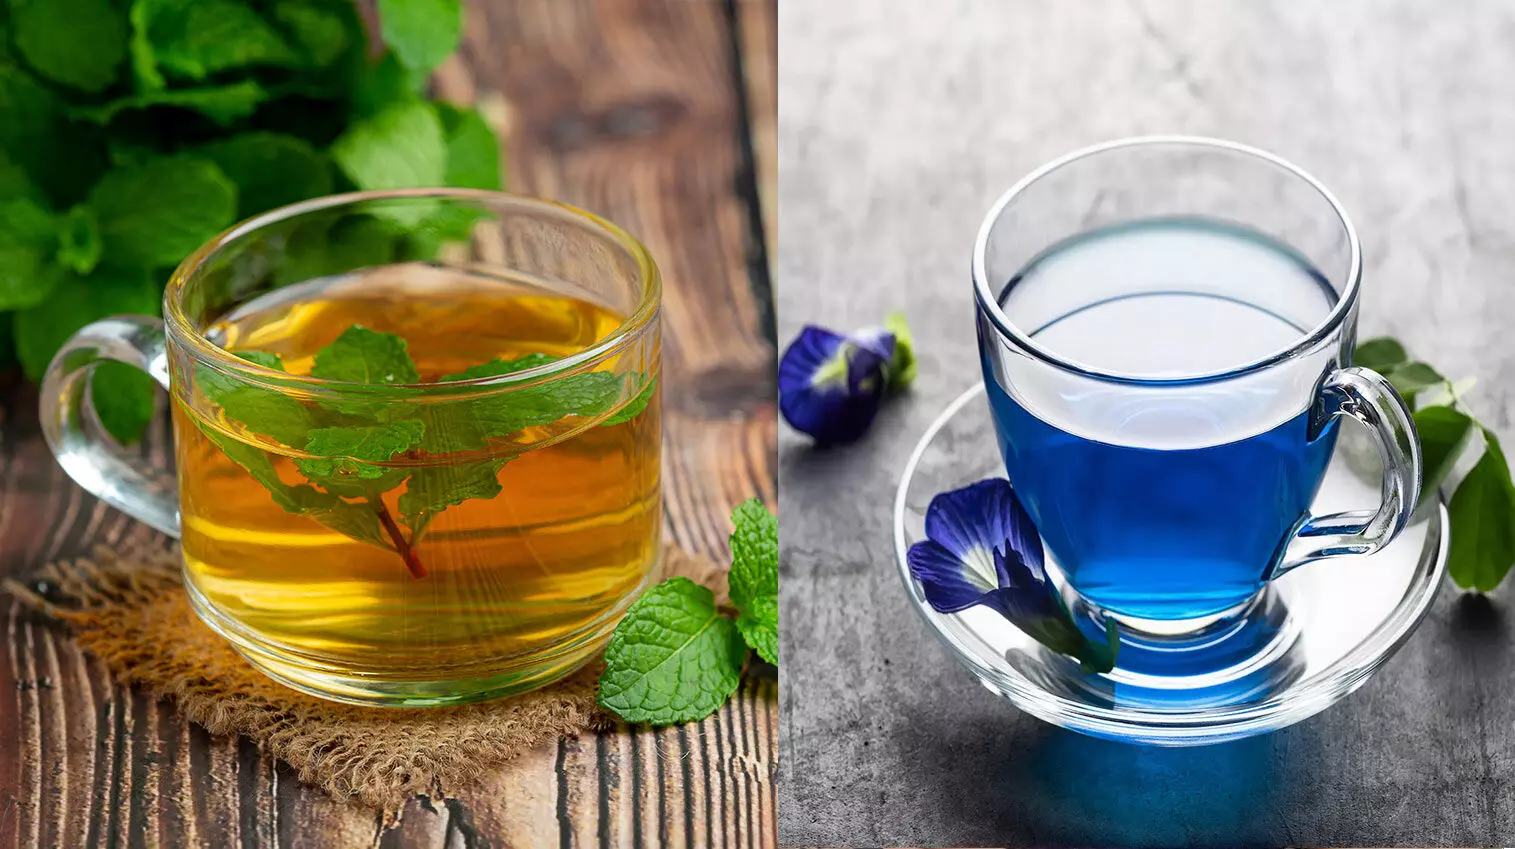 Which Tea Helps you Lose Weight: Green Tea or Butterfly Pea Tea?